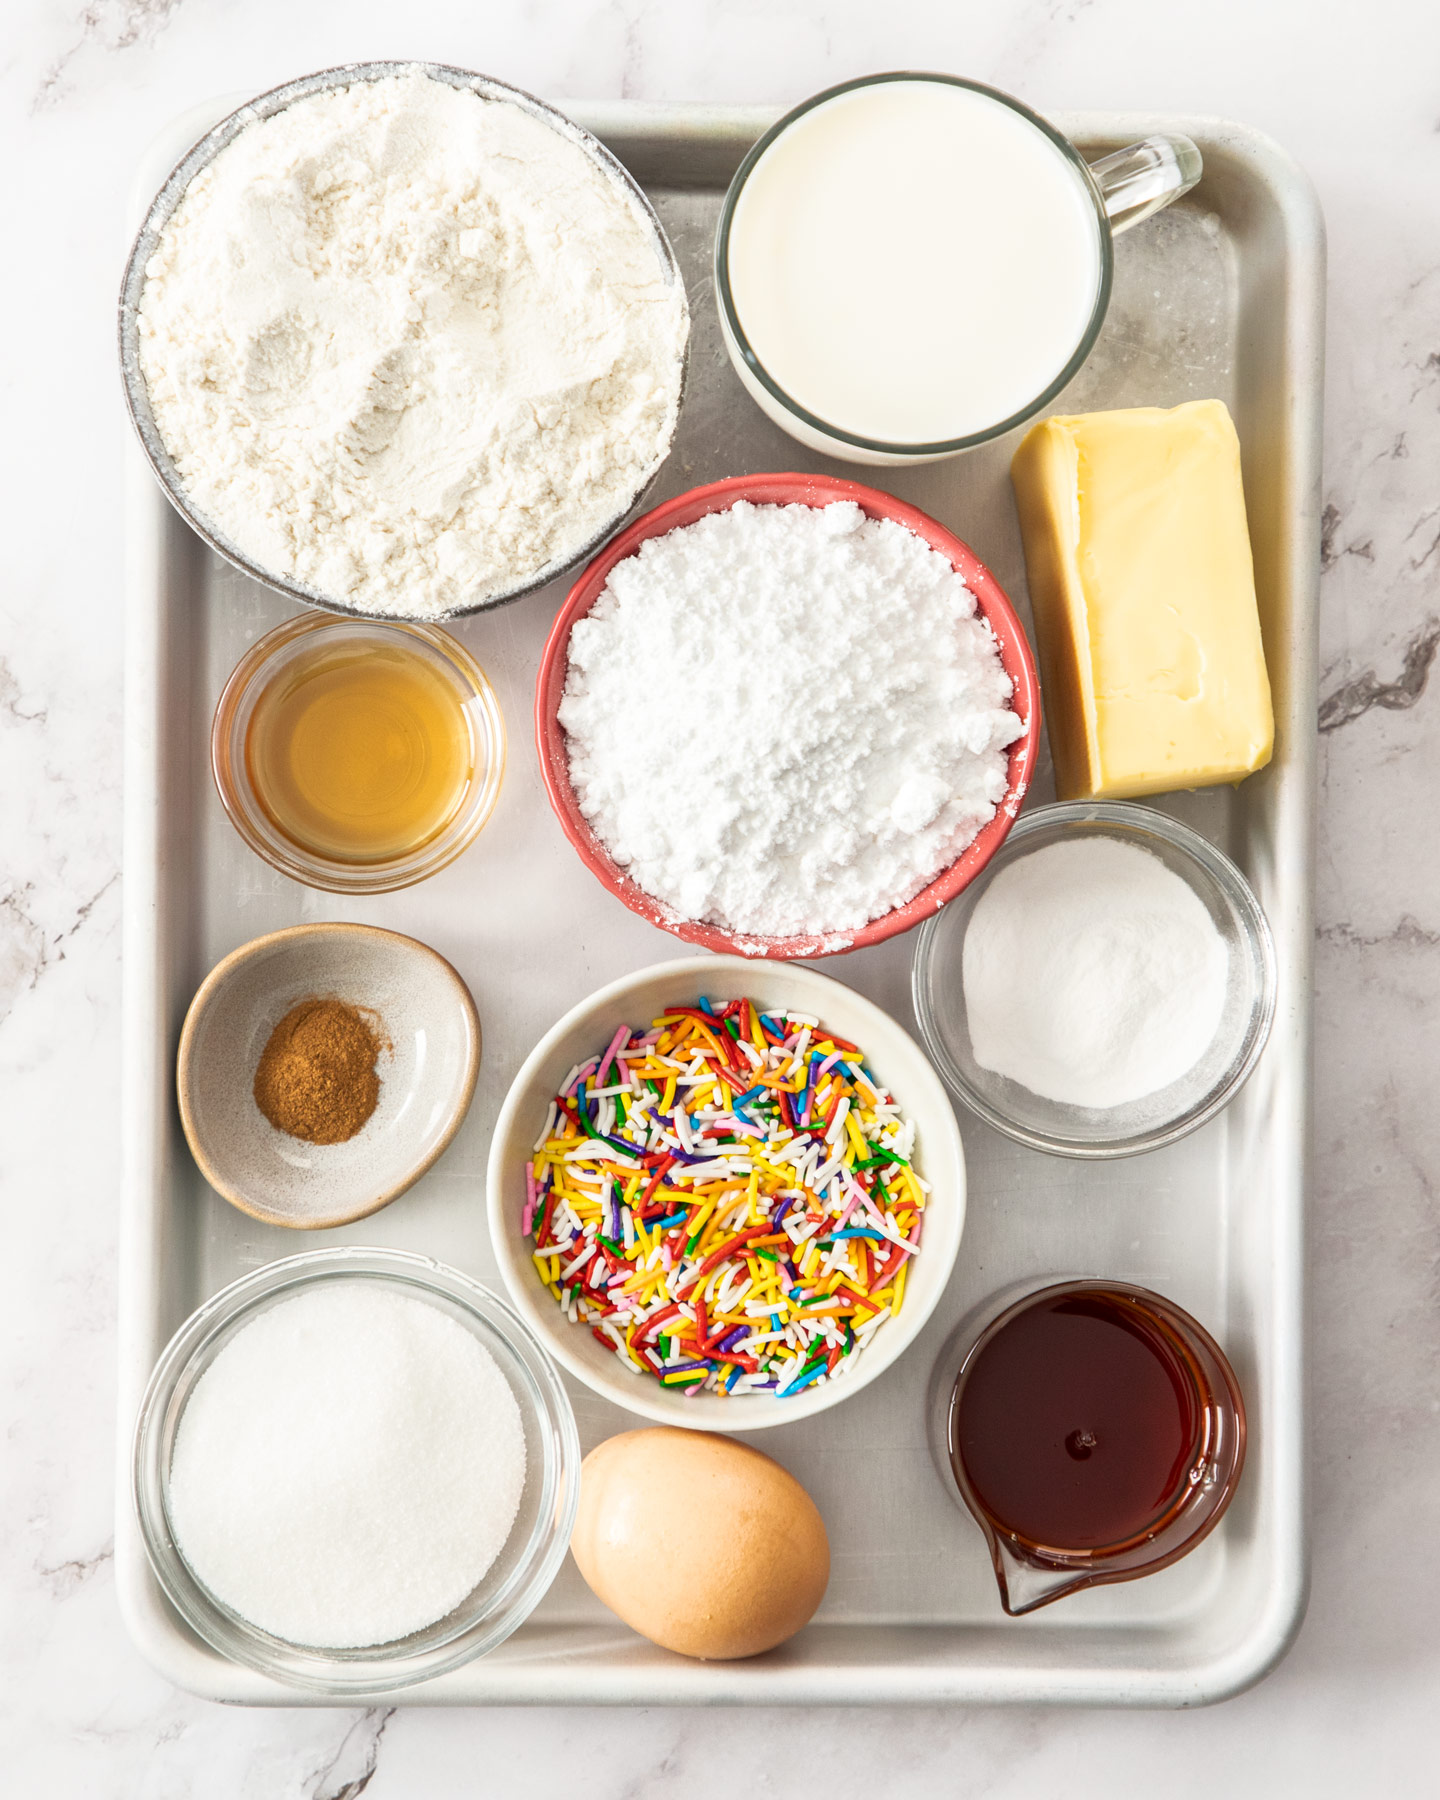 Ingredients for funfetti pancakes on a baking tray.